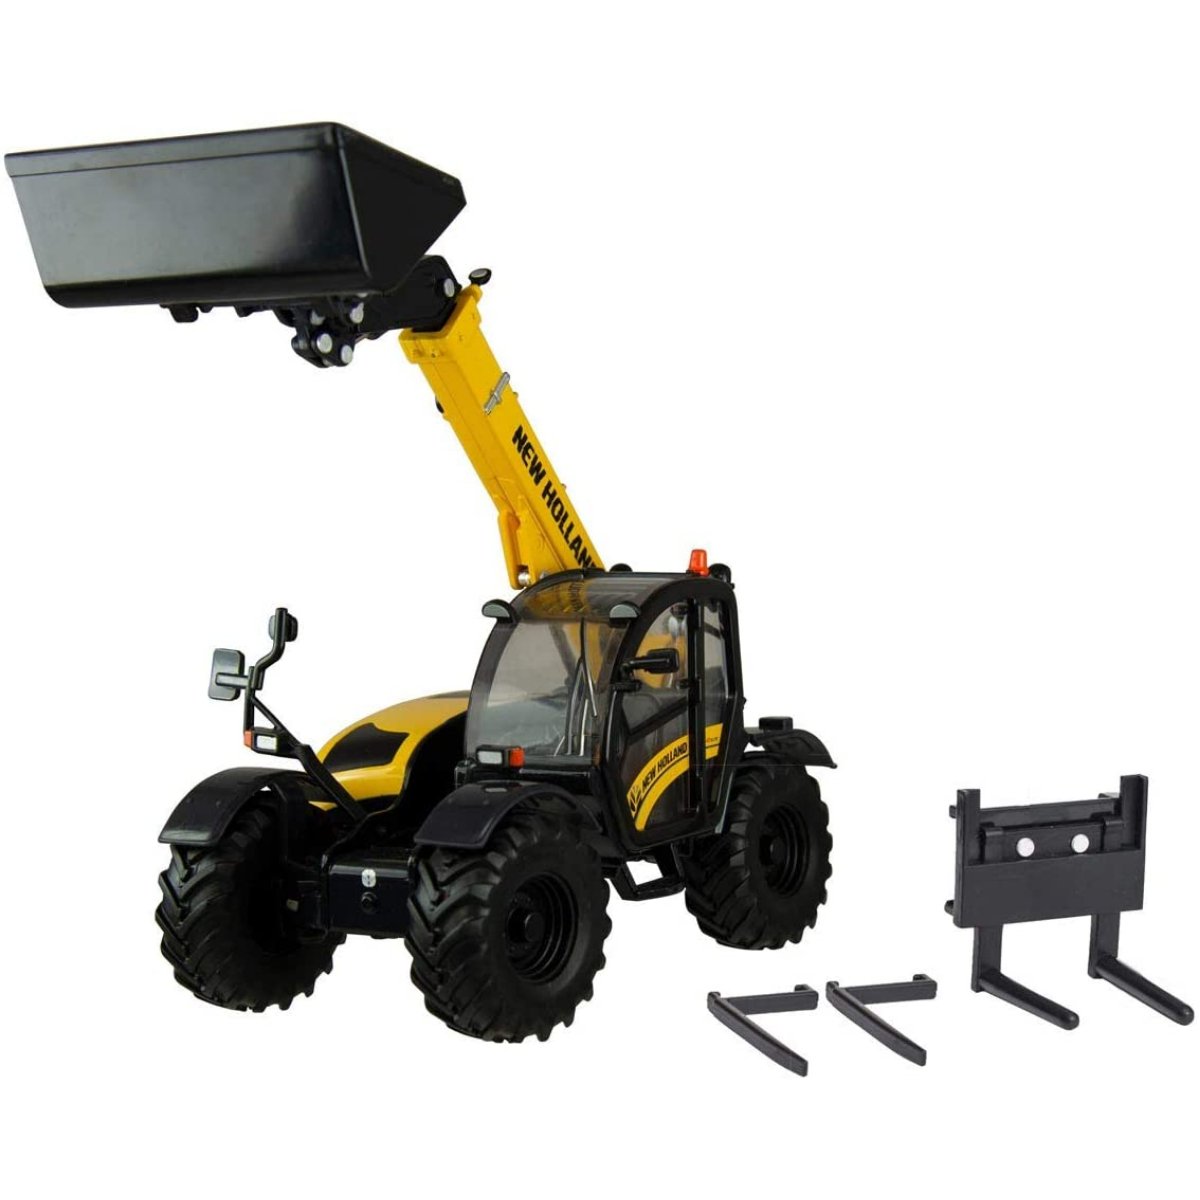 Britains New Holland TH 7.42 Telehandler - 1:32 Scale - Phillips Hobbies